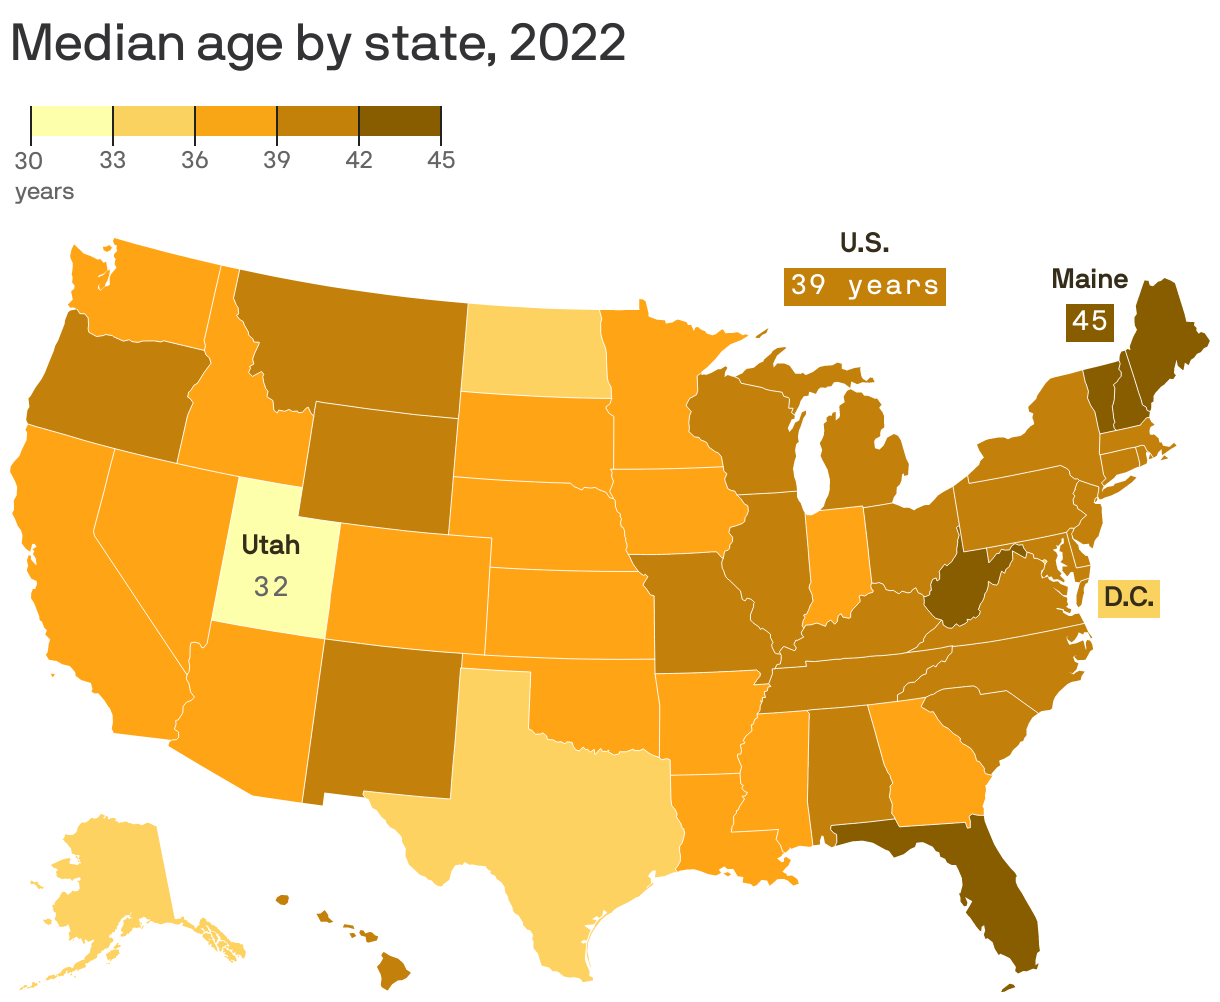 Median age by state, 2022